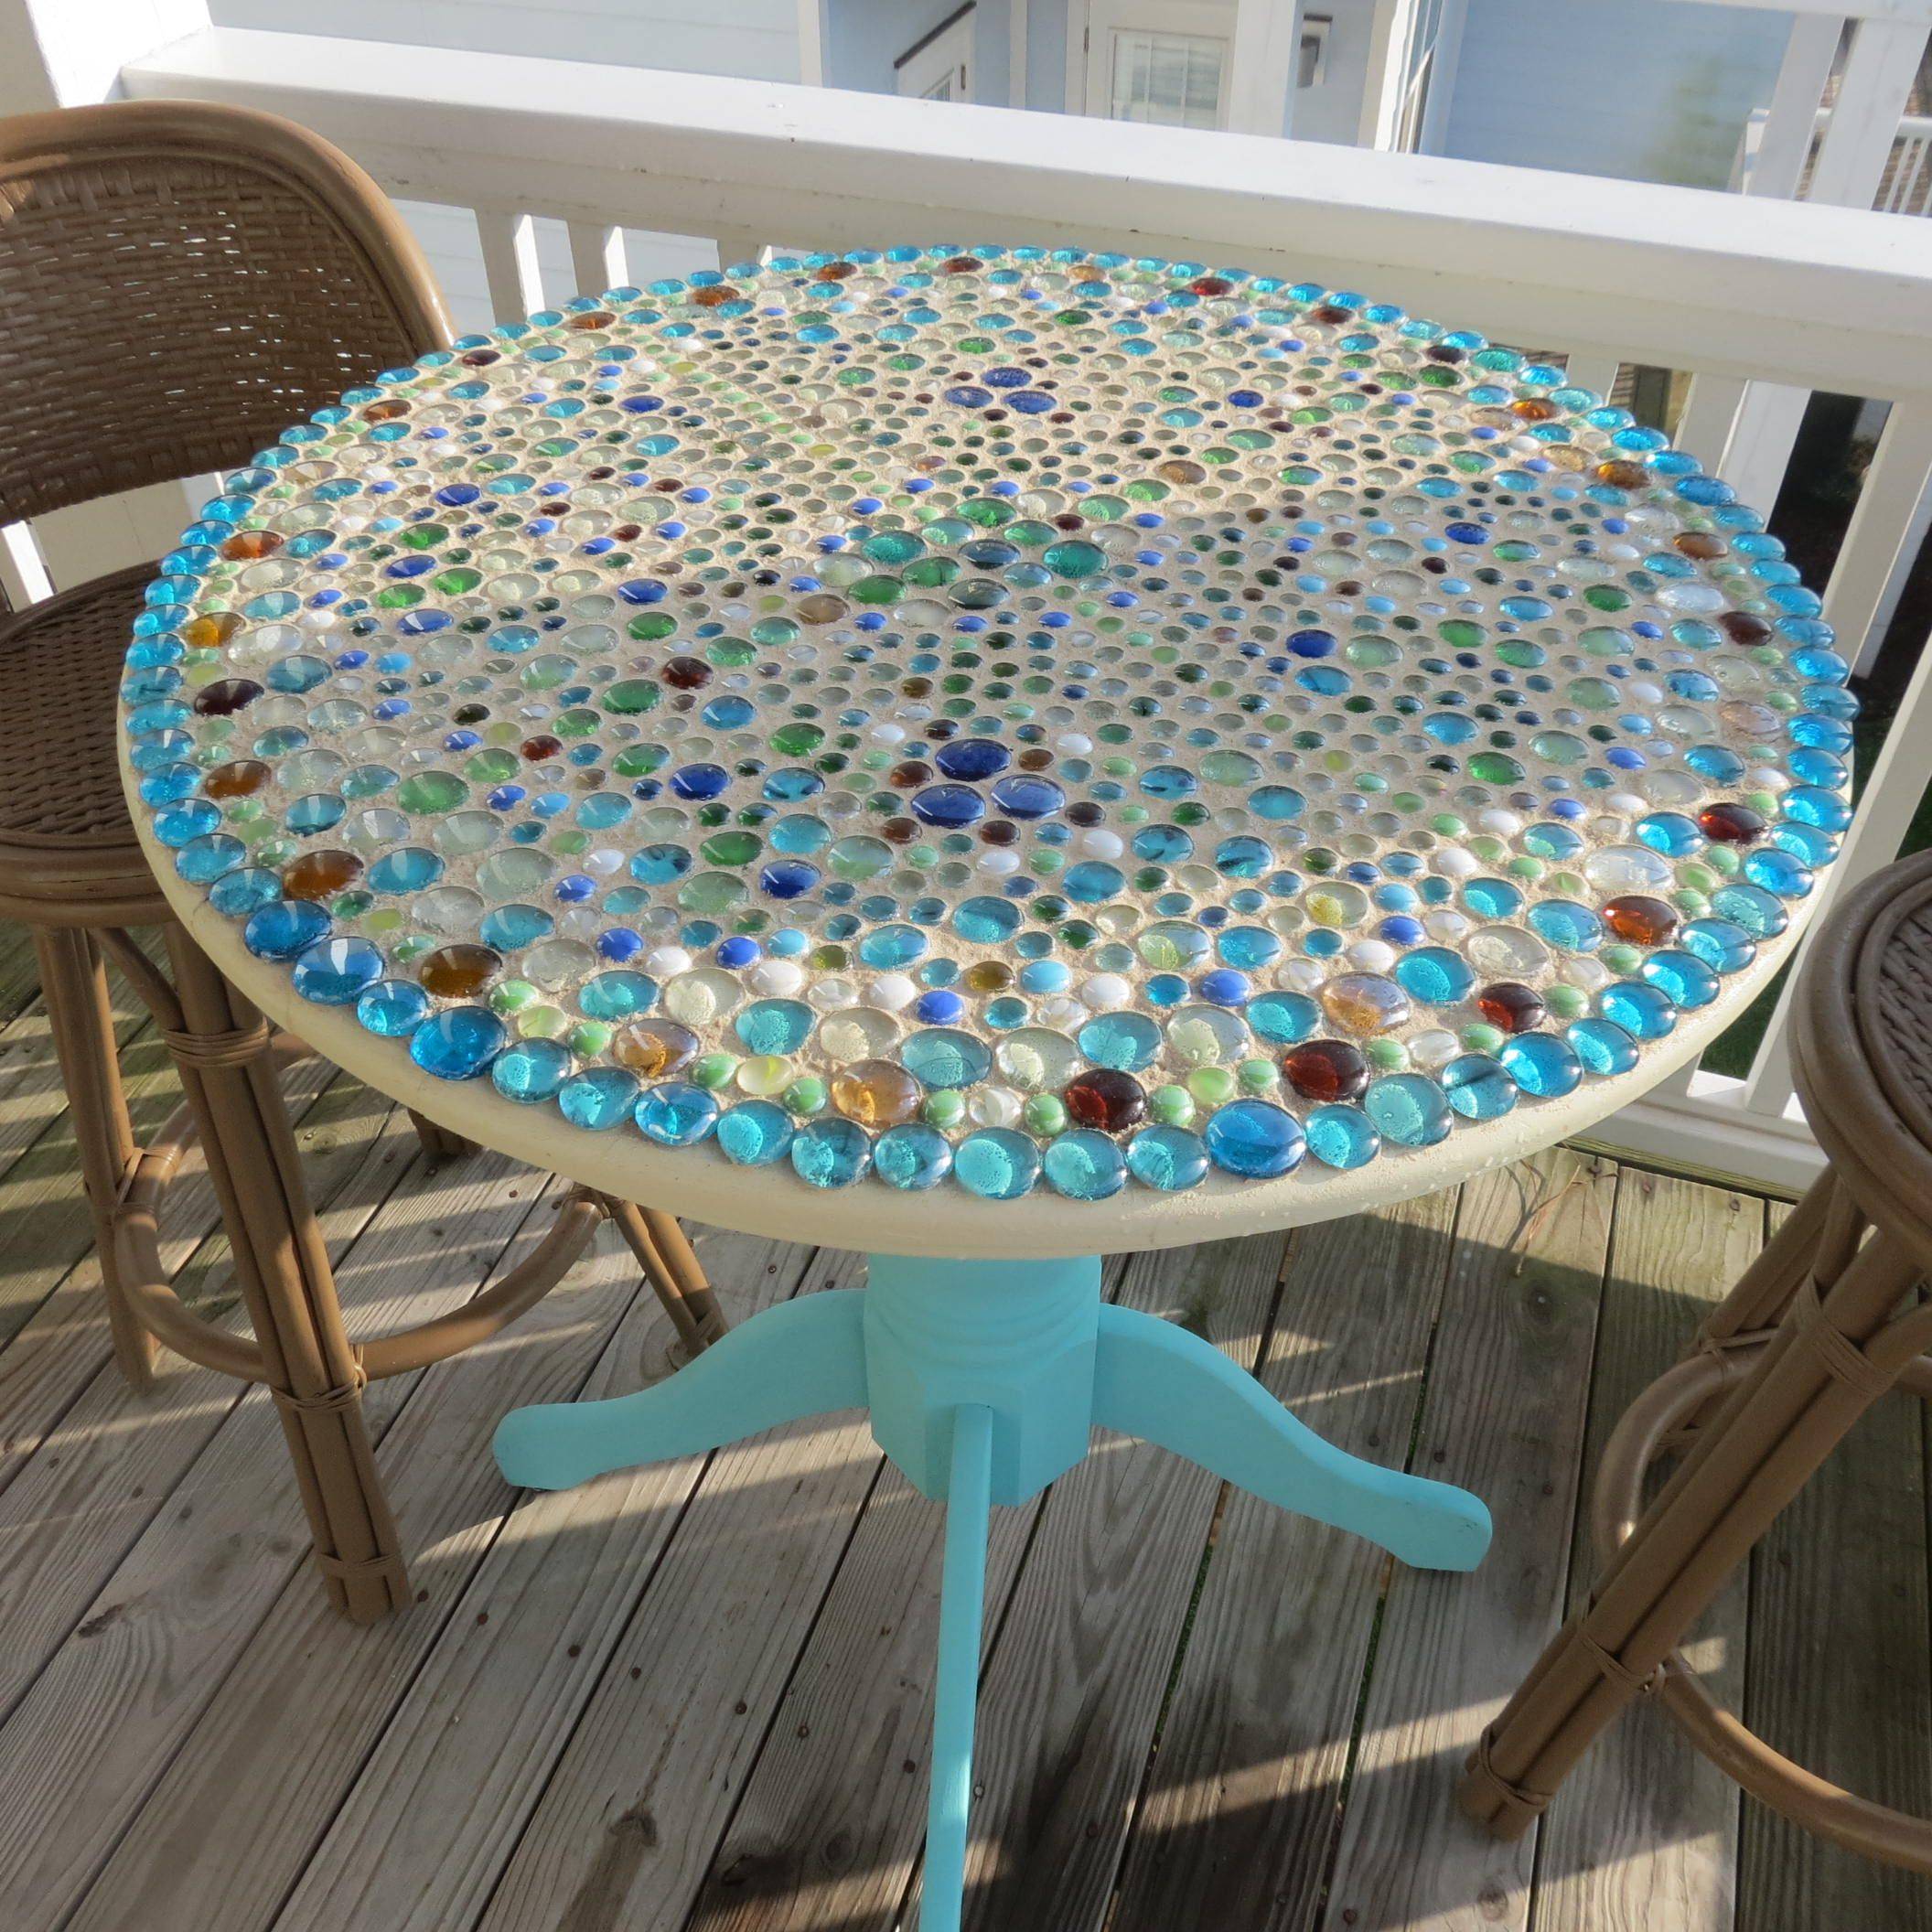 Best Ideas Diy Table Top Mosaic Projects Mosaic Table